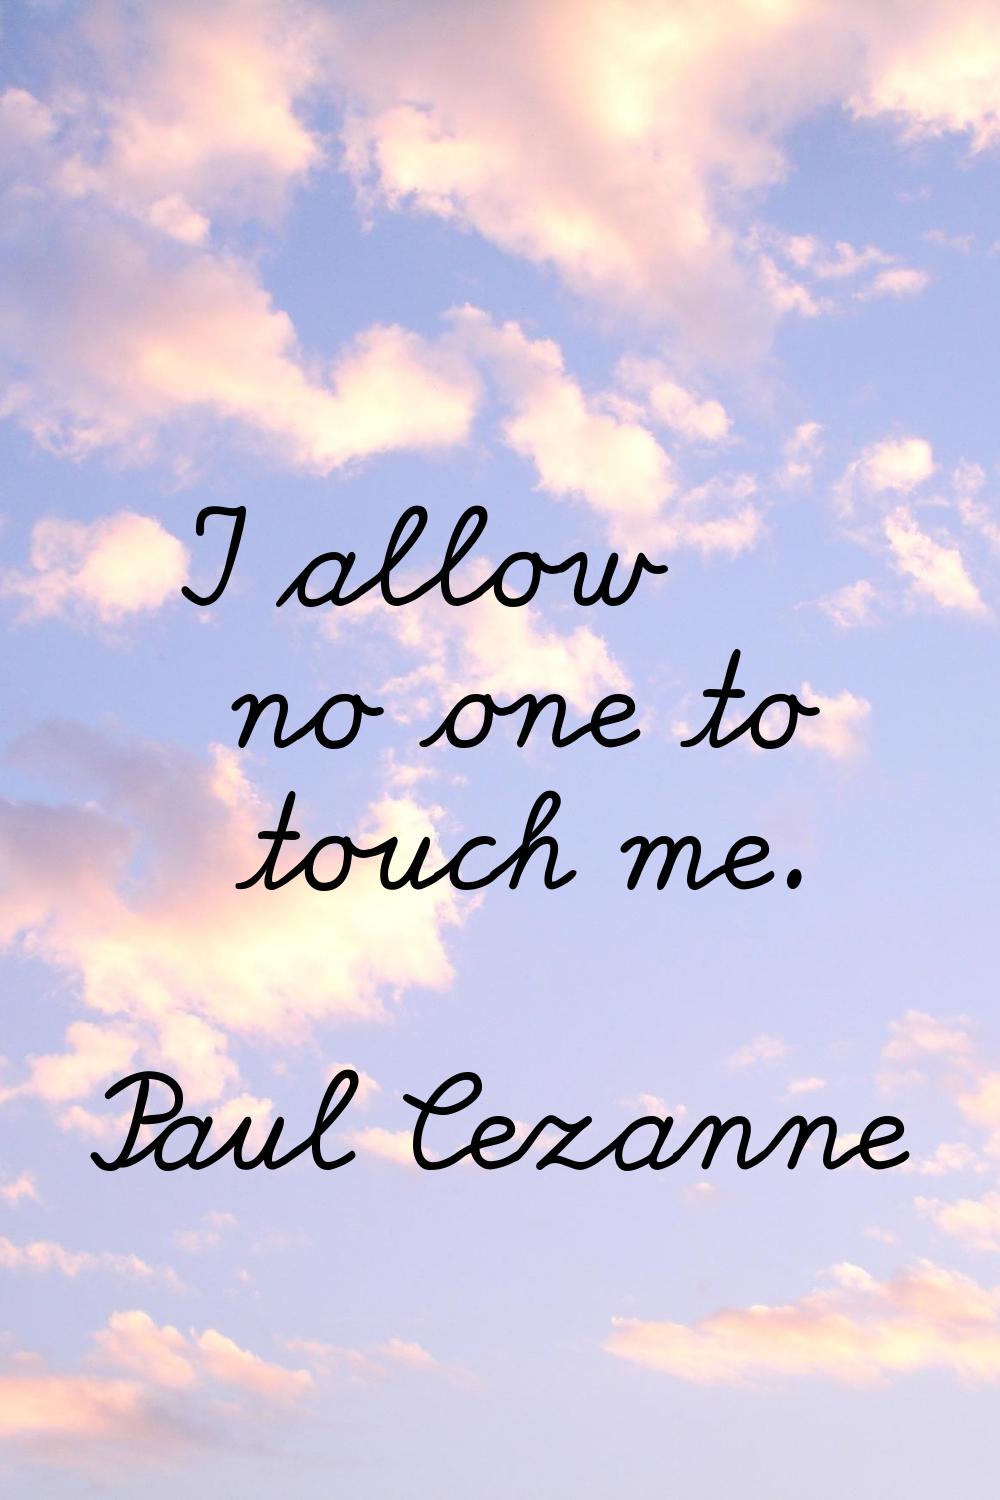 I allow no one to touch me.